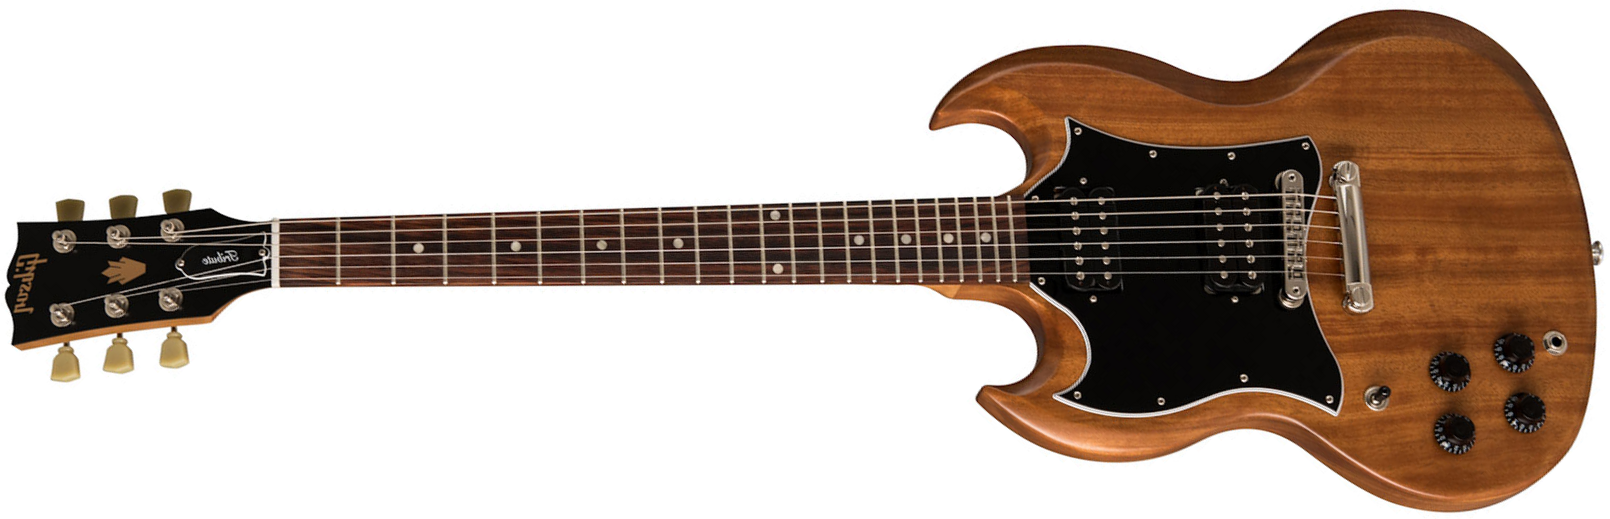 Gibson Sg Tribute Lh Modern Gaucher 2h Ht Rw - Natural Walnut - Left-handed electric guitar - Main picture